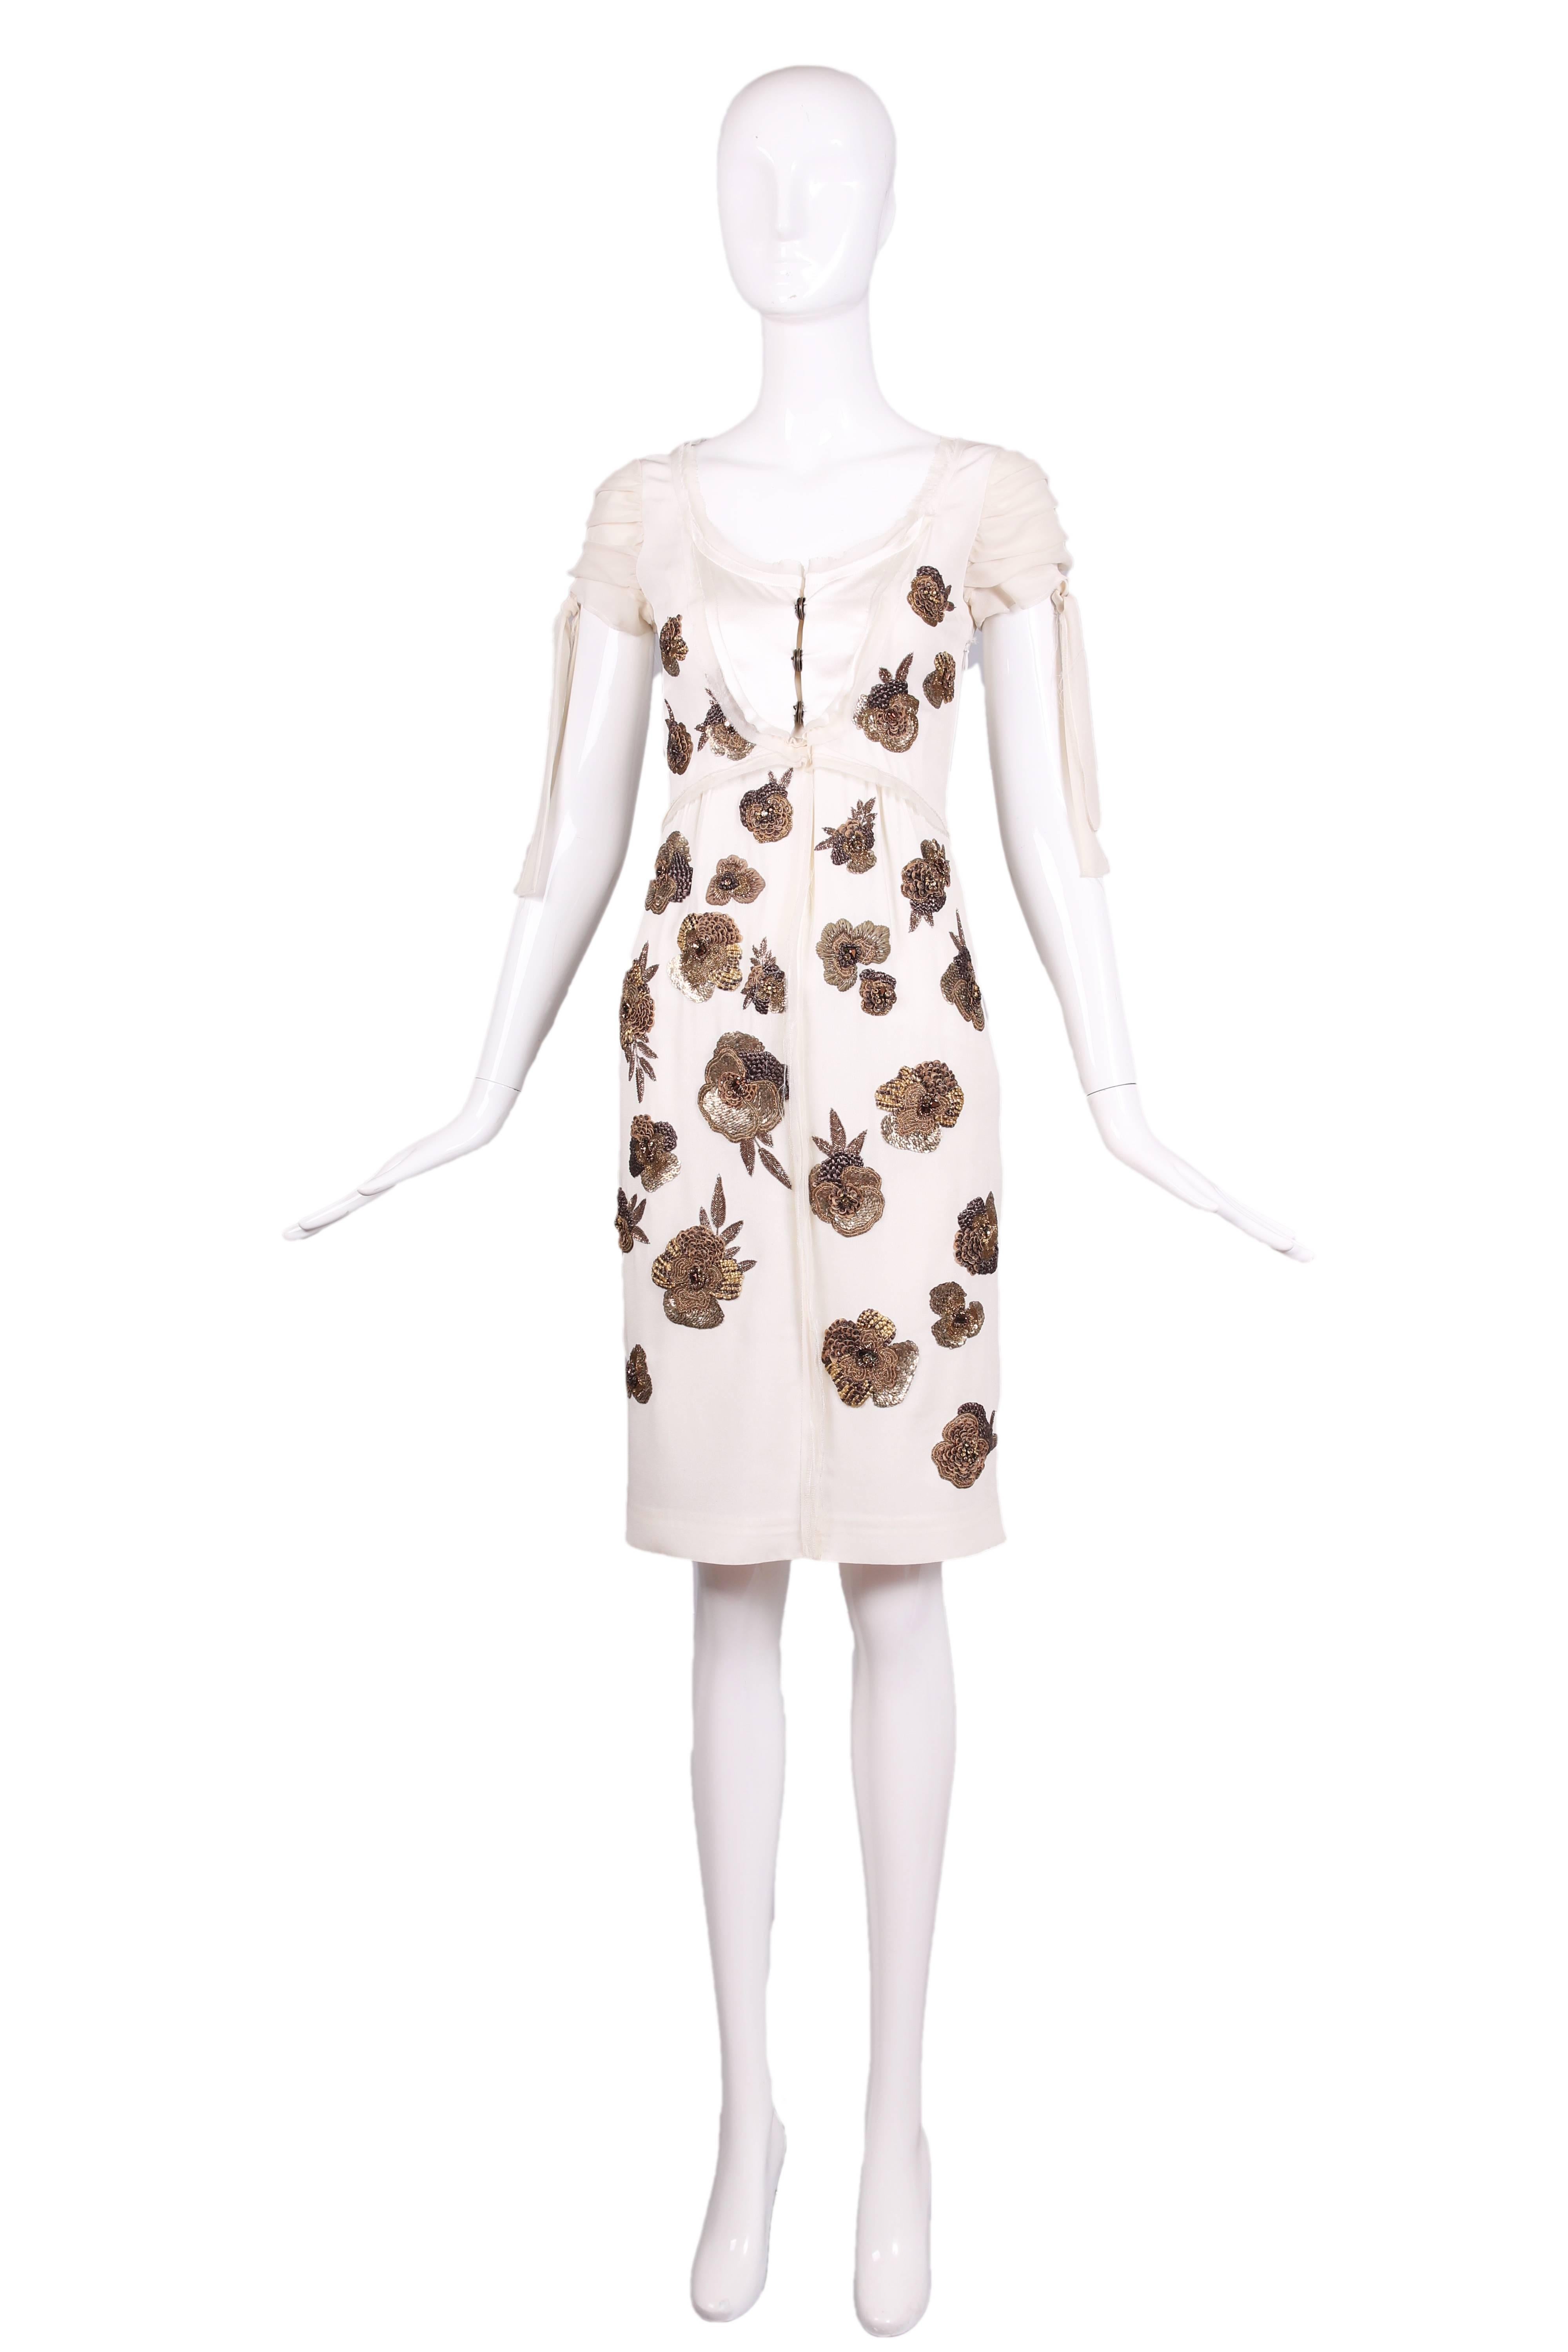 Dice Kayek white silk dress w/three button snap closure at bust, scoop neck, and cap sleeves that tie. Dress features bronze beads and sequin embroidered floral design and an unfinished hem with intentional loose threads. In excellent condition.